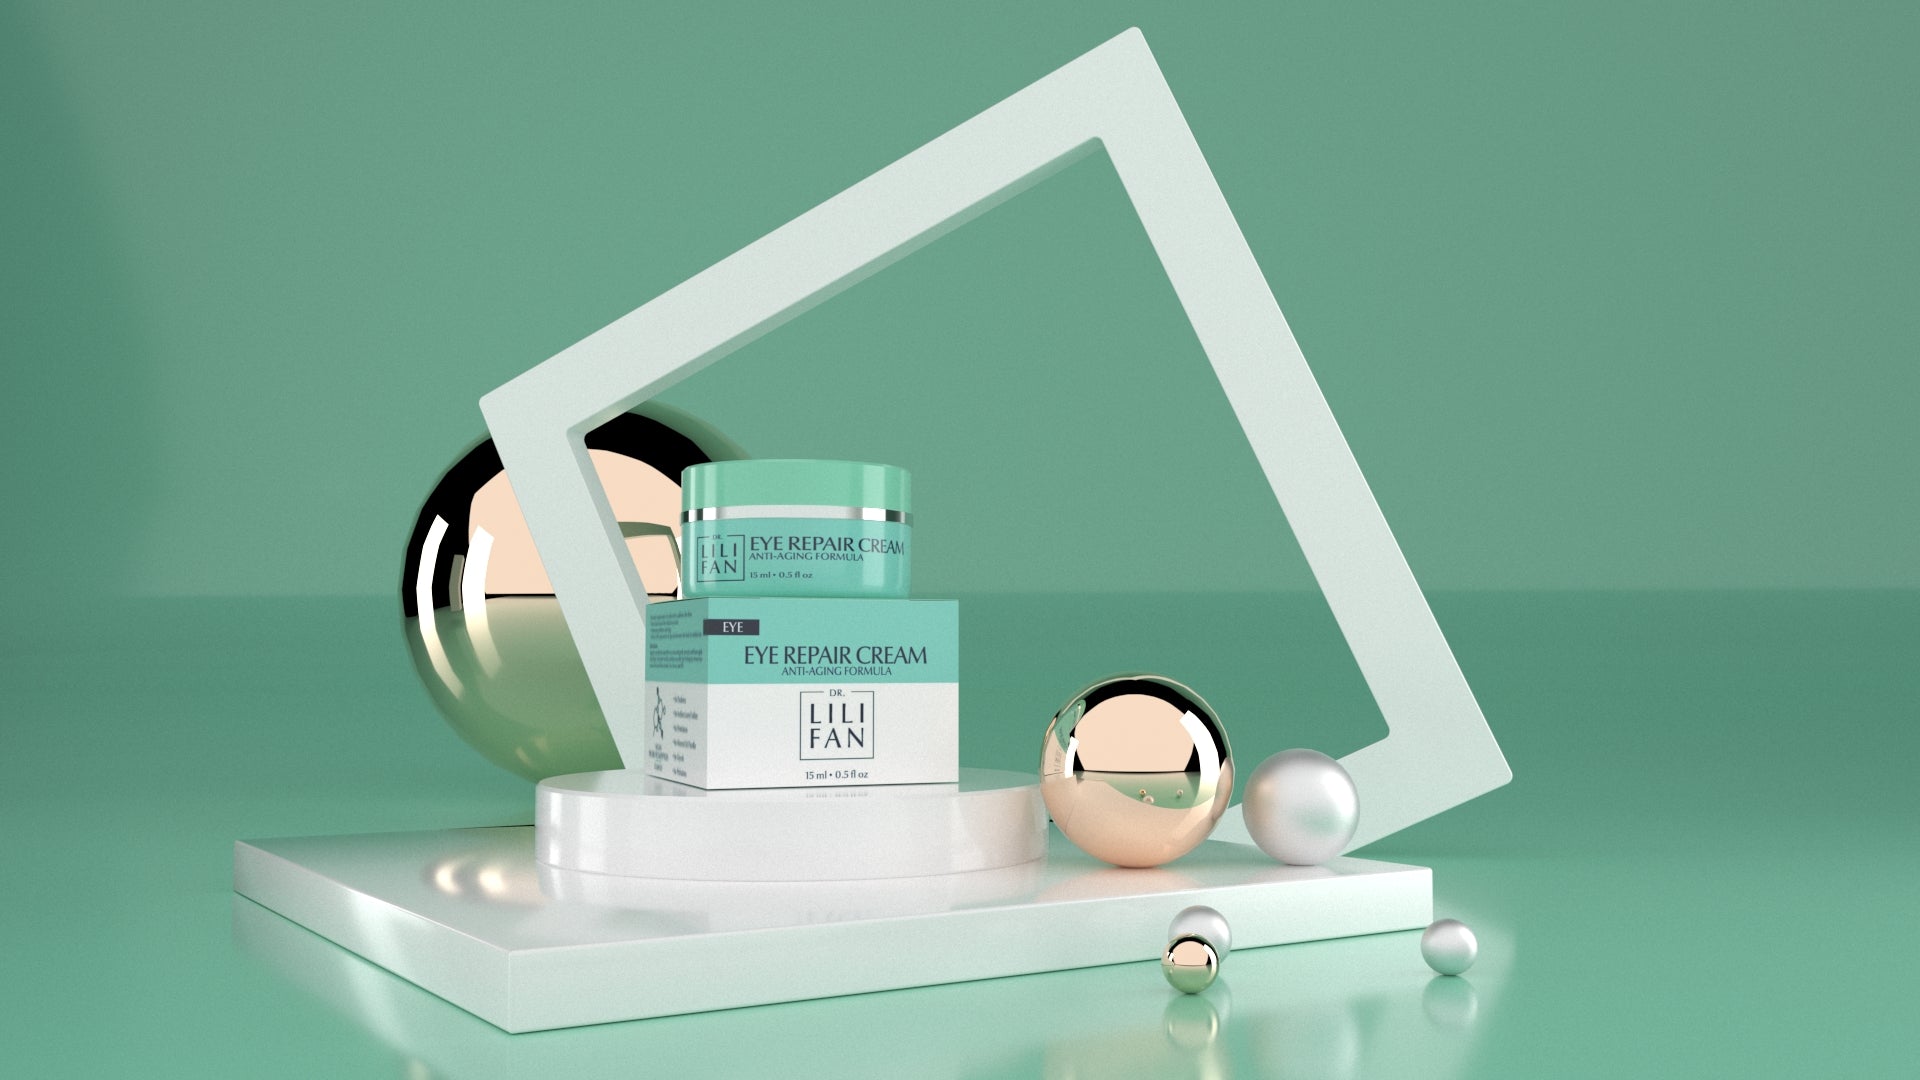 A jar of eye cream on top of its box with a green artsy background